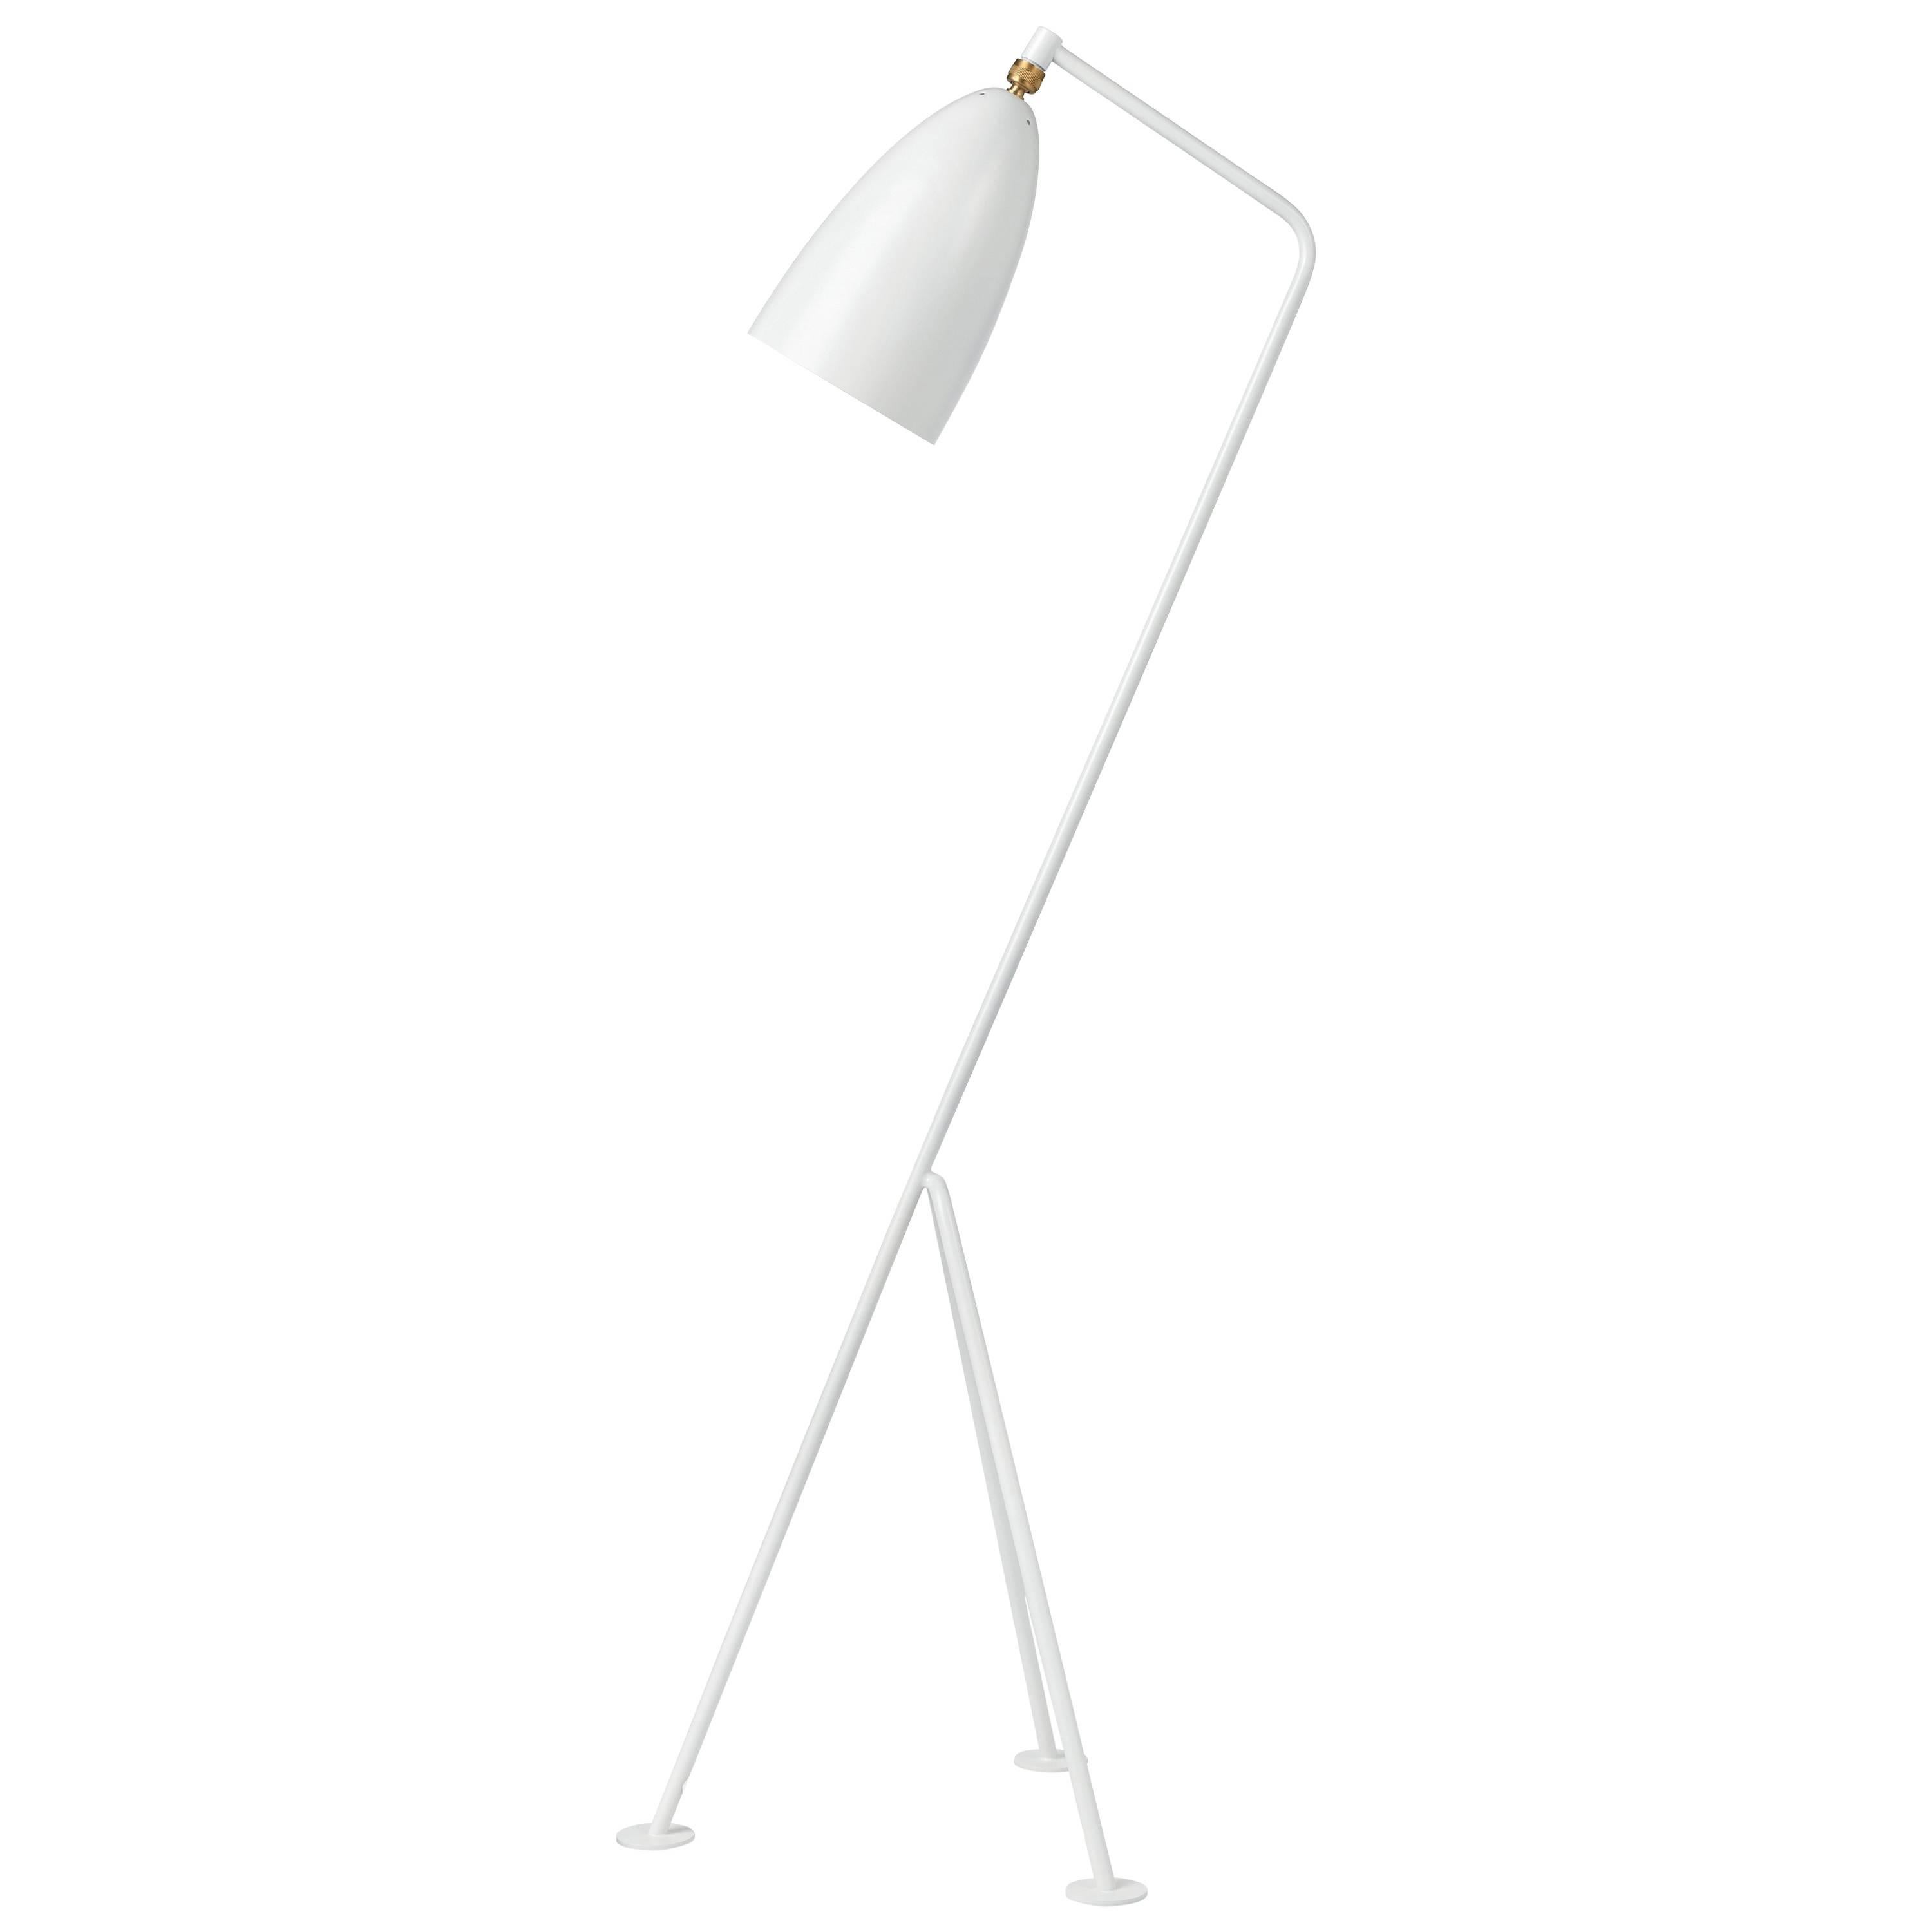 Greta Magnusson Grossman 'Grasshopper' floor lamp in yellow. Designed in 1947 by Grossman, this is an authorized re-edition by GUBI of Denmark who meticulously reproduces her work with scrupulous attention to detail and materials that are faithful